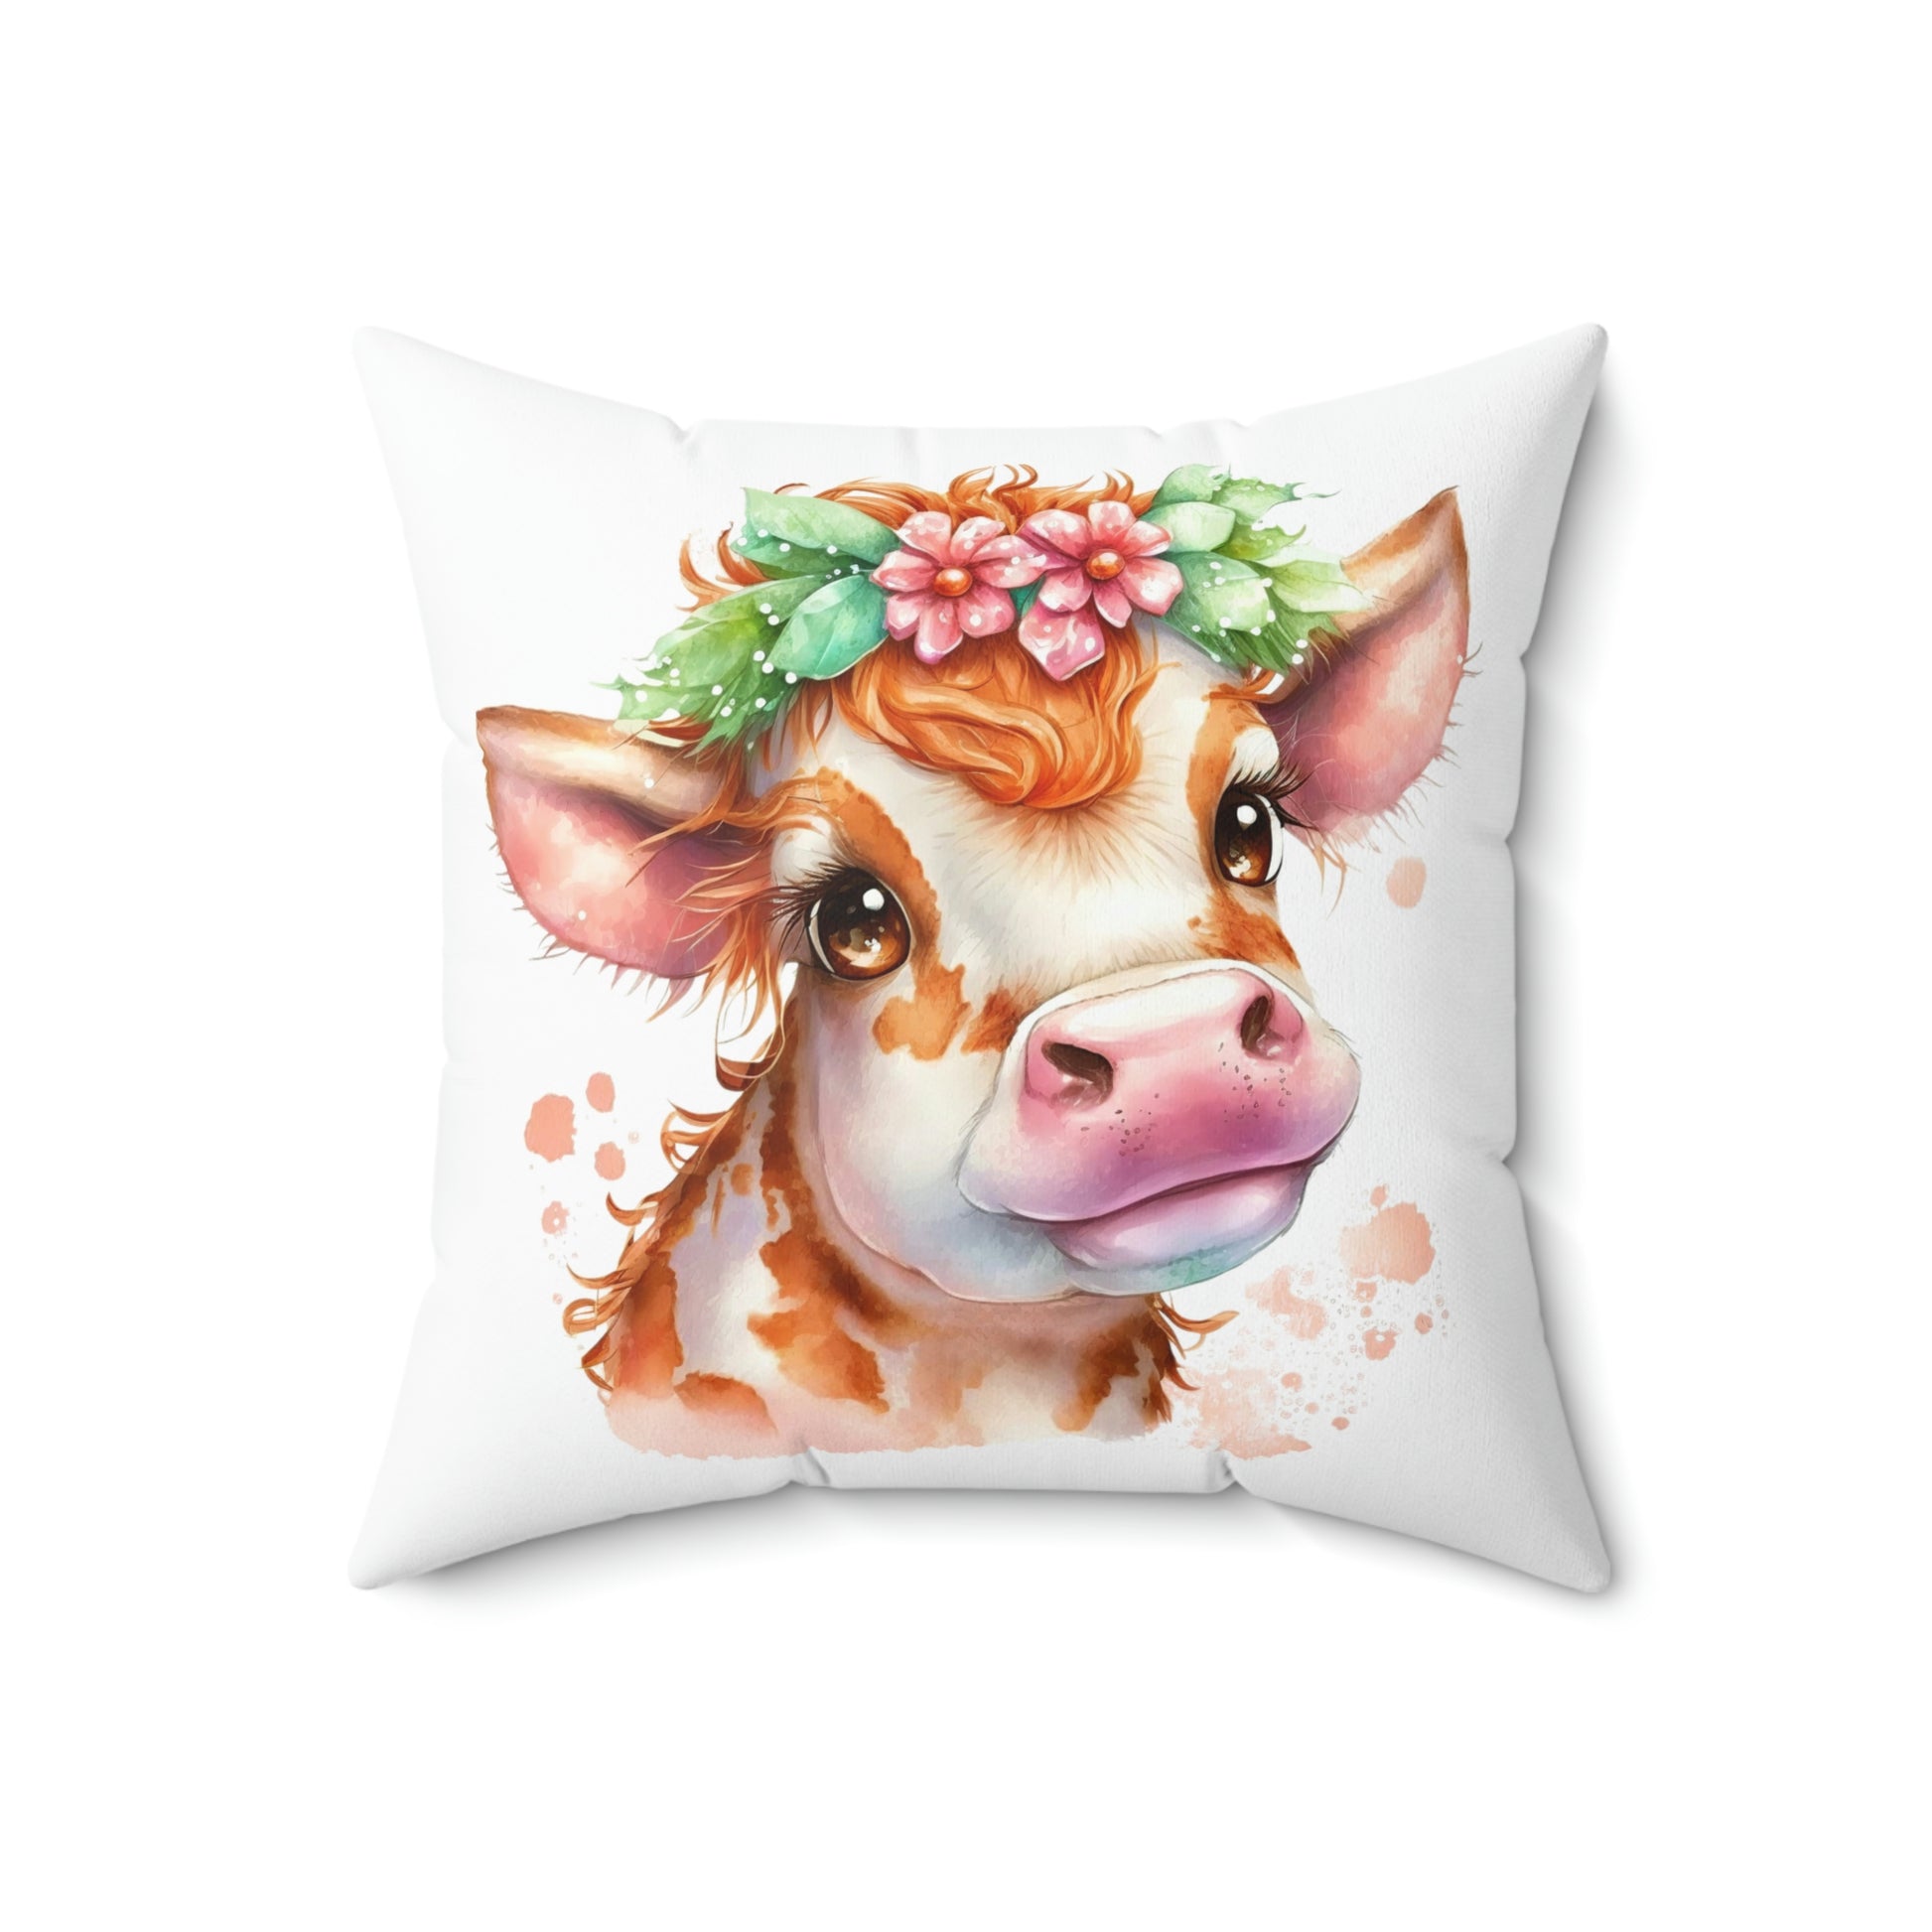 cow pillow for your cow theme room decor, floral cow pattern accent throw pillow, cow throw pillow sitting on a couch or chair, watercolor cow print pillow